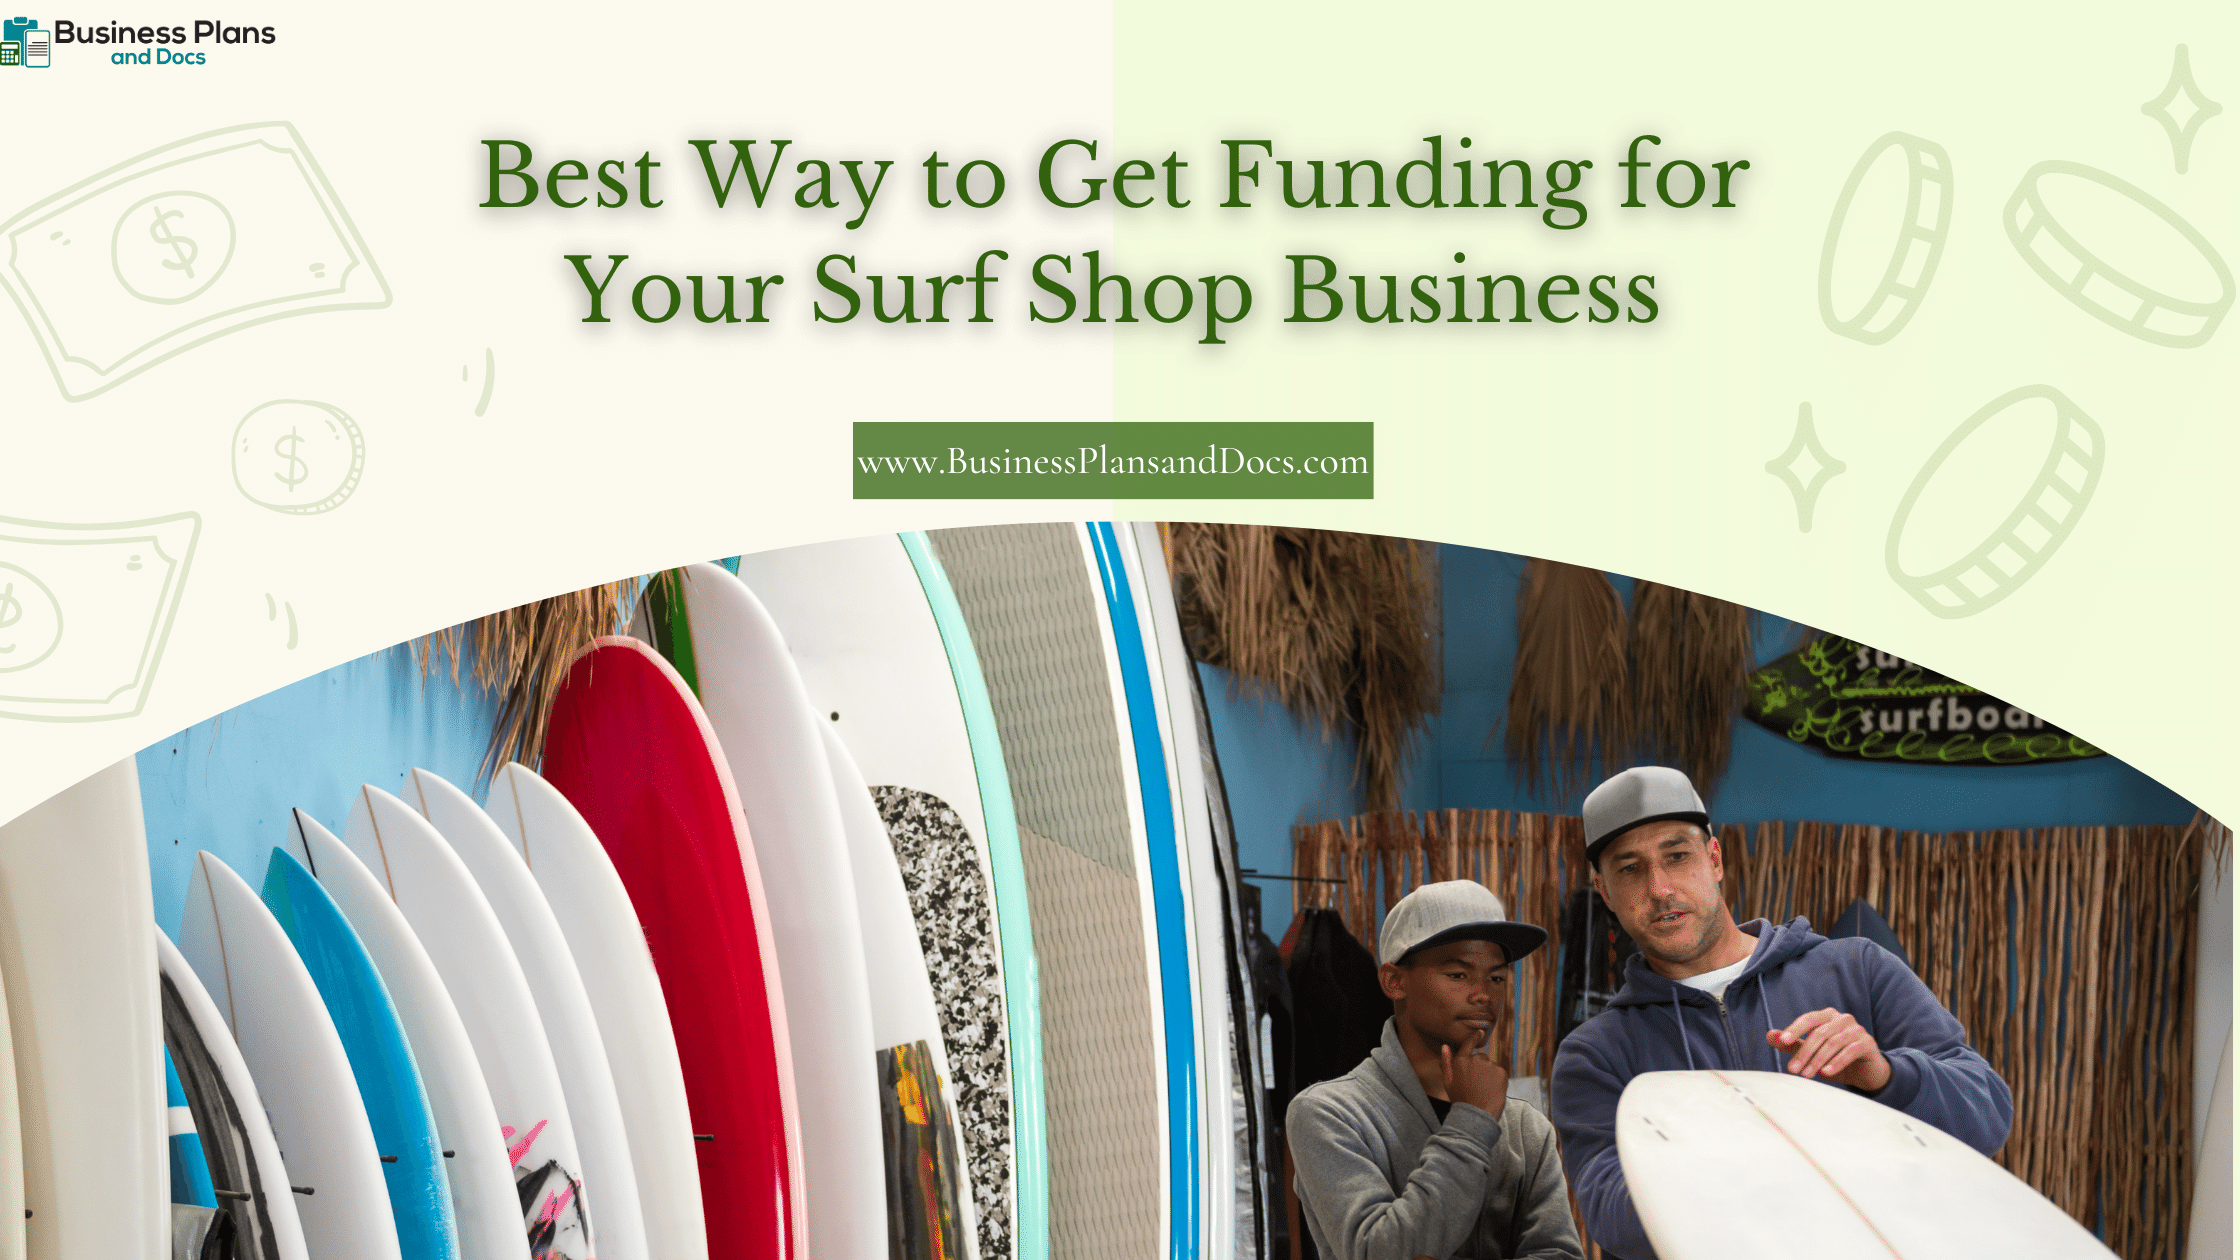 Best Way to Get Funding for Your Surf Shop Business